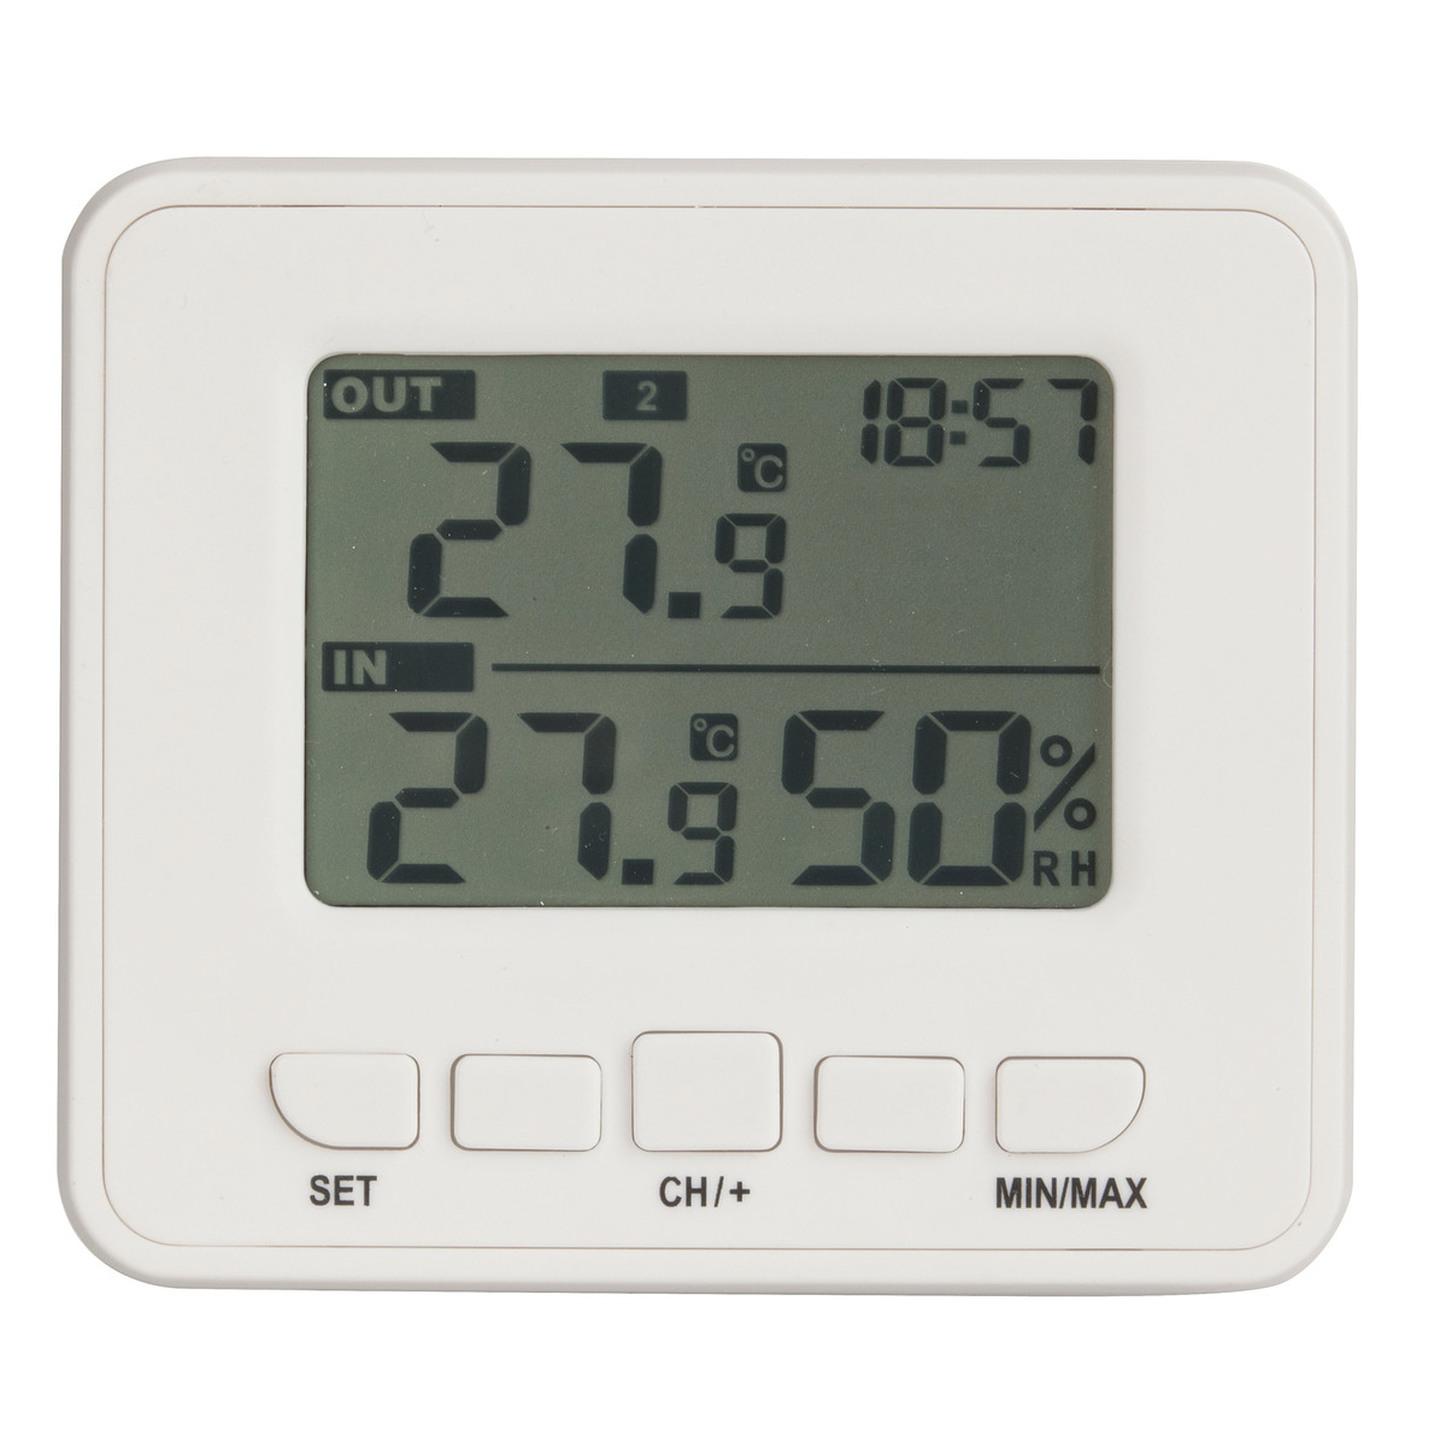 Wireless In and Out Thermometer and Hygrometer